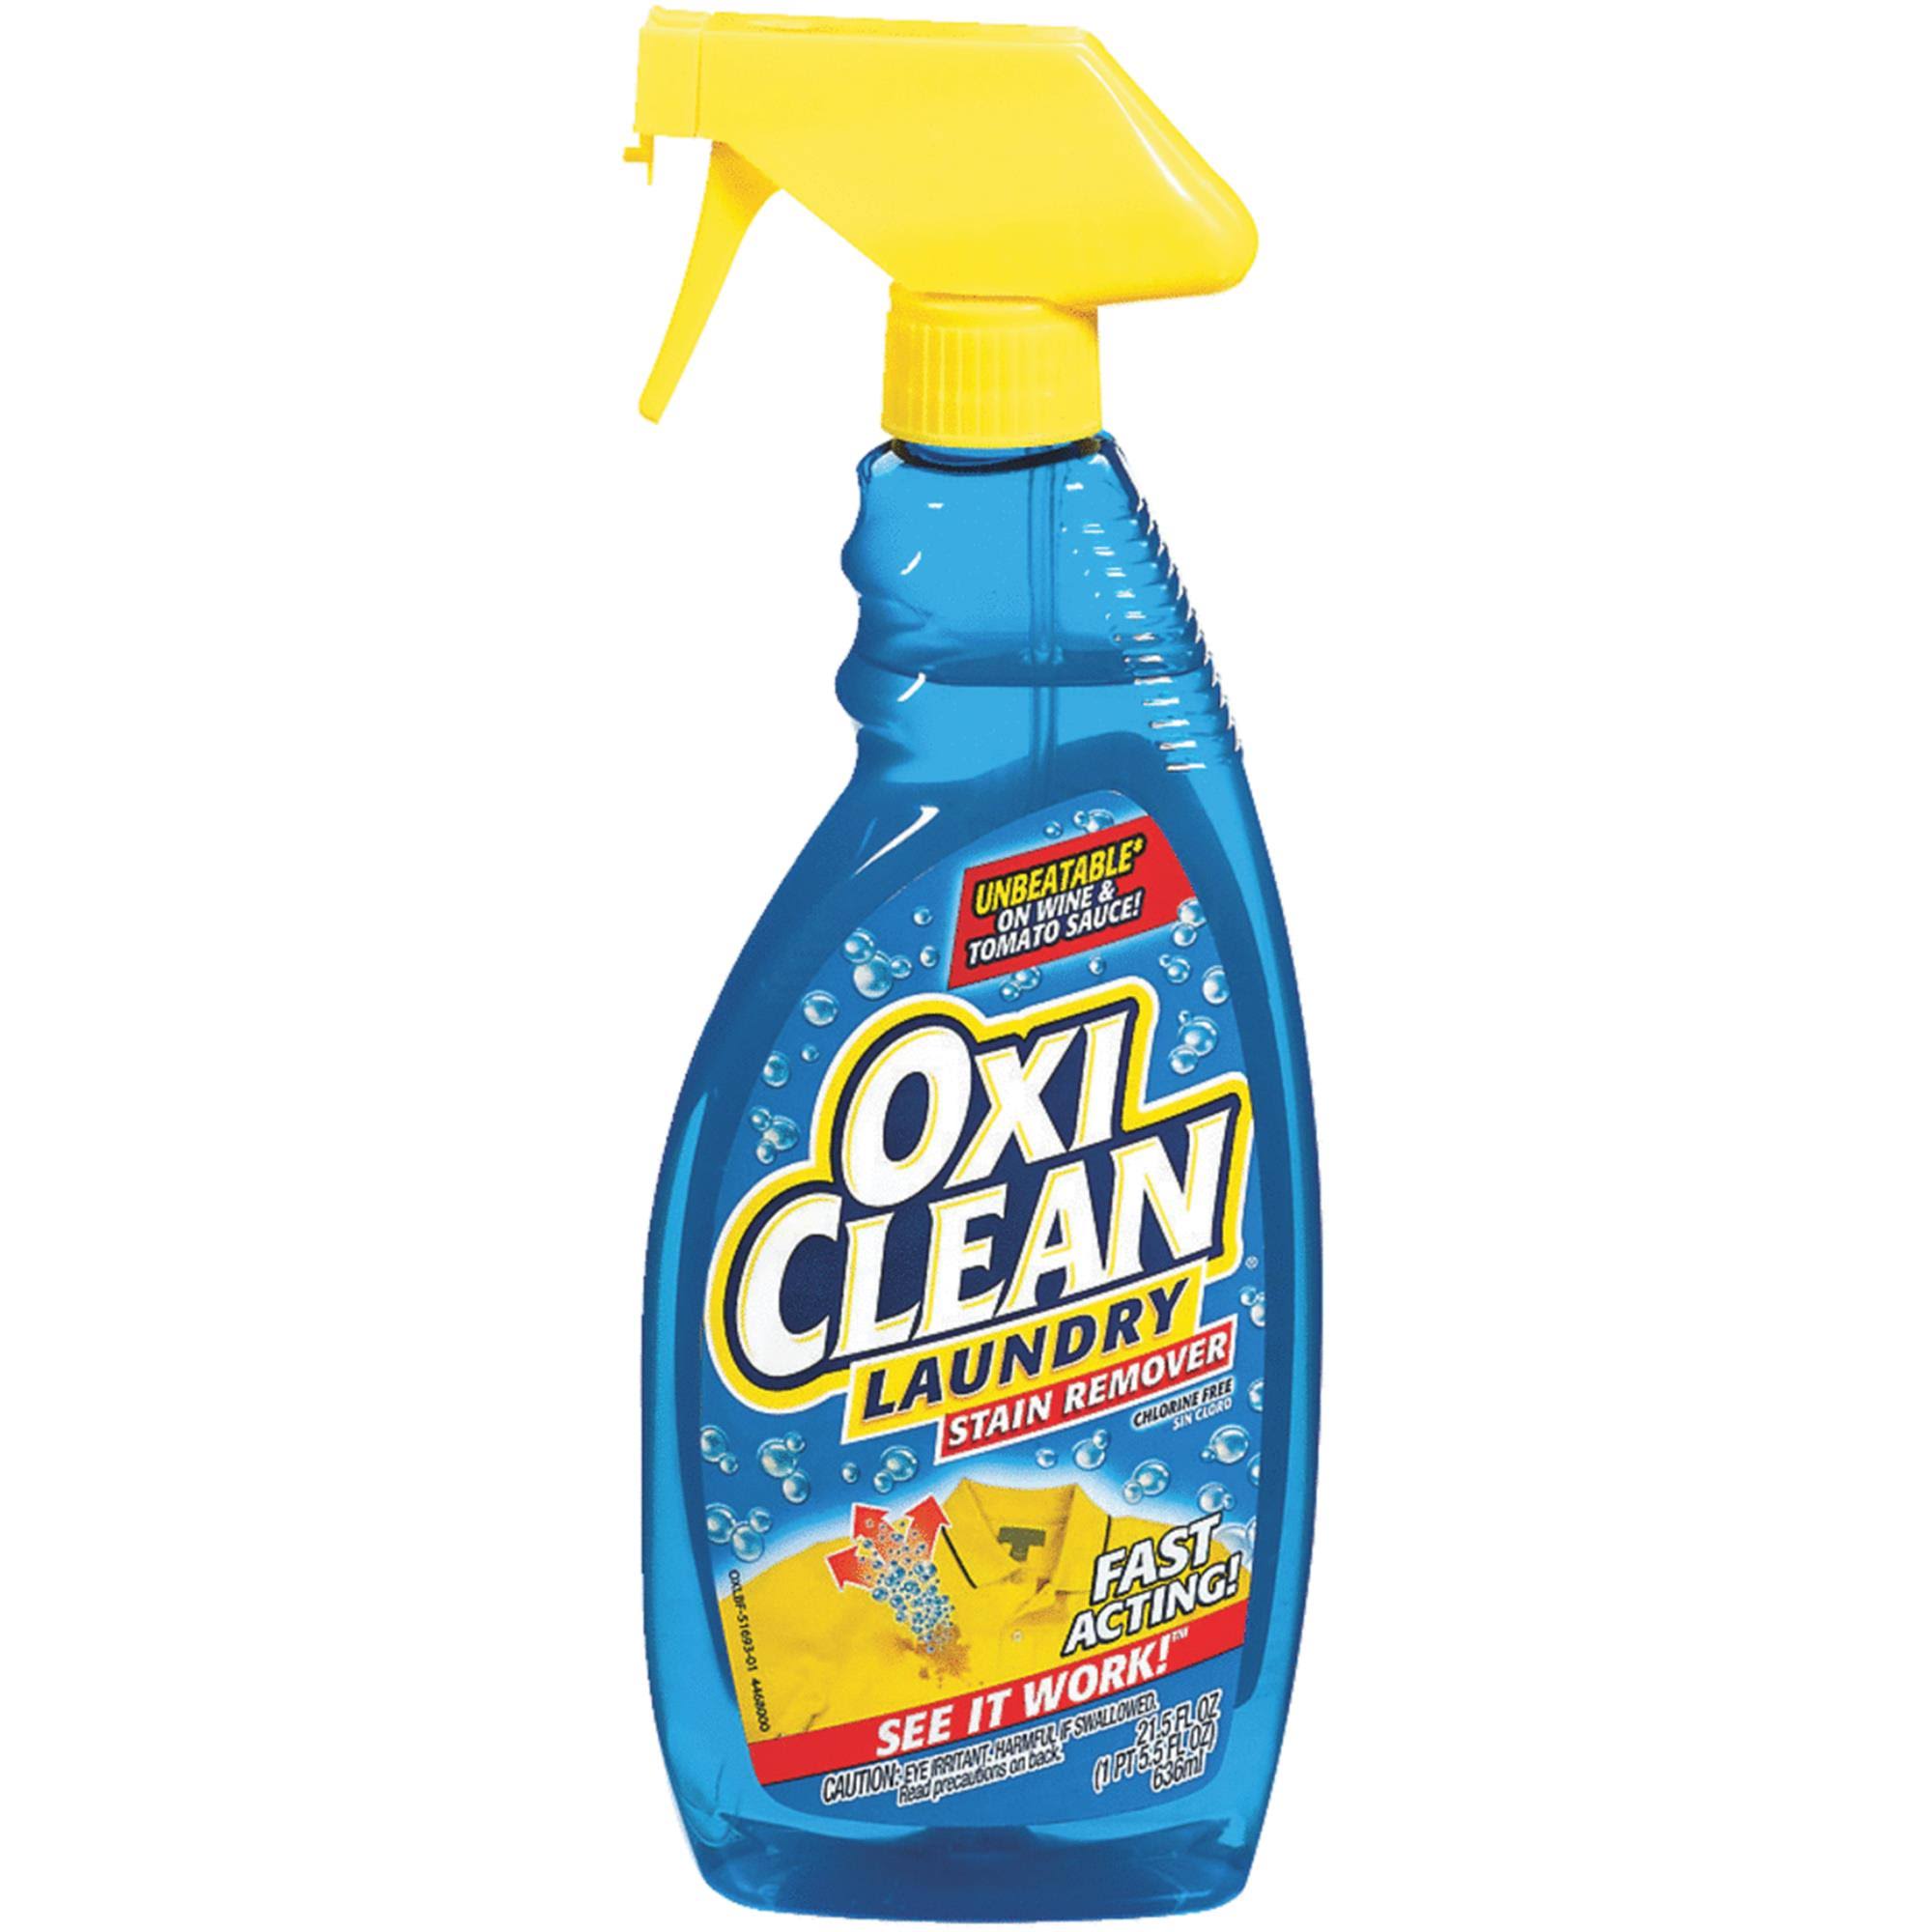 OxiClean Laundry Stain Remover Spray - 21.5 Oz